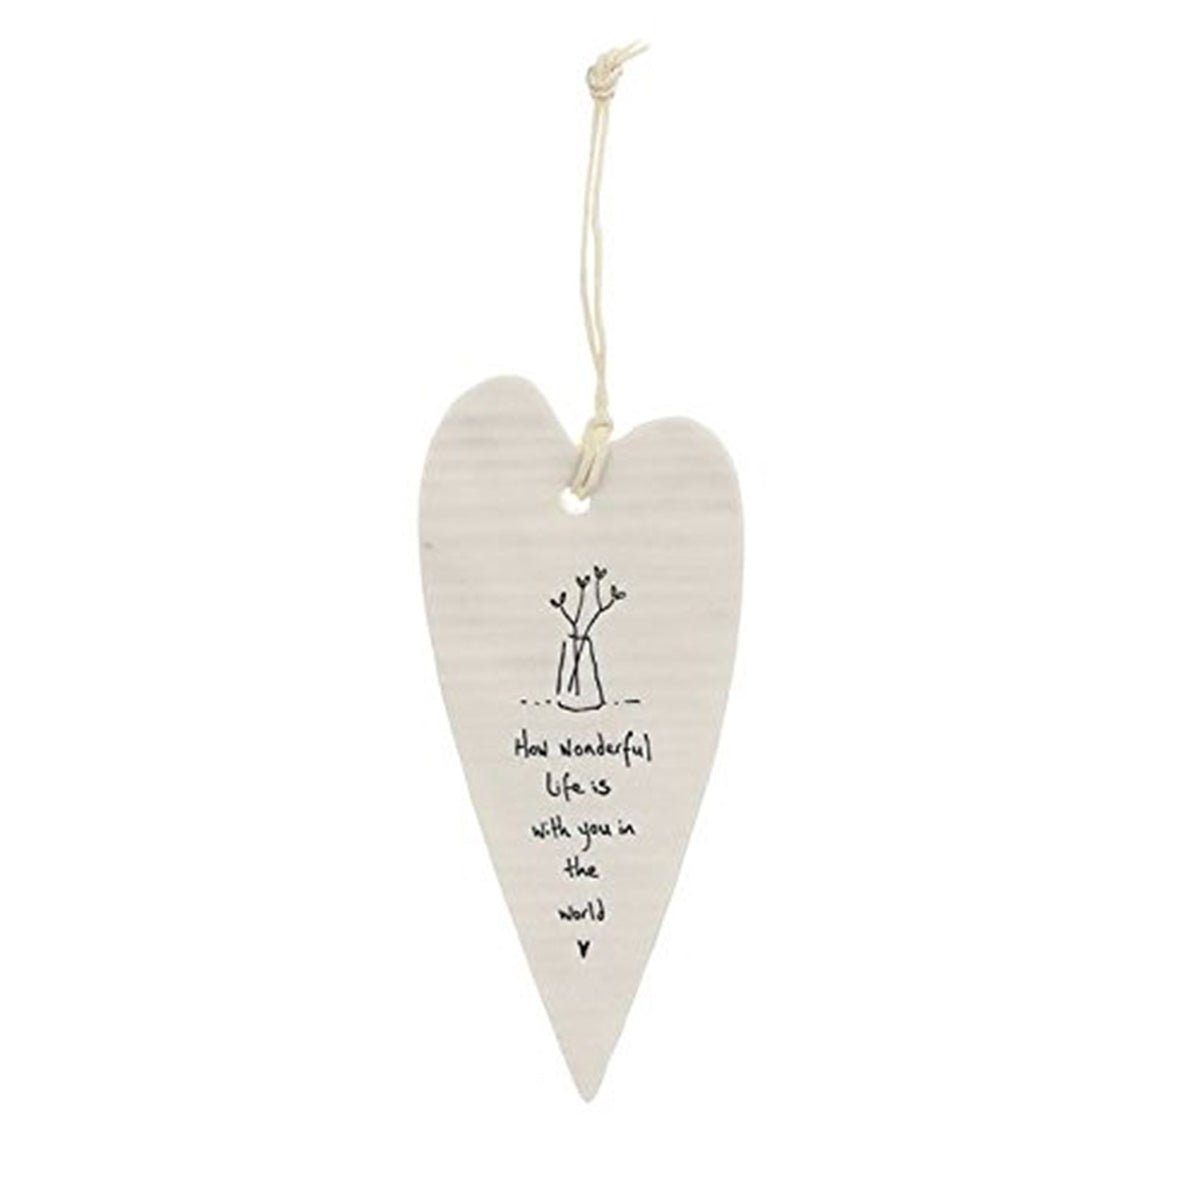 East of India How Wonderful Life is Wobbly Long Heart Porcelain Hanger